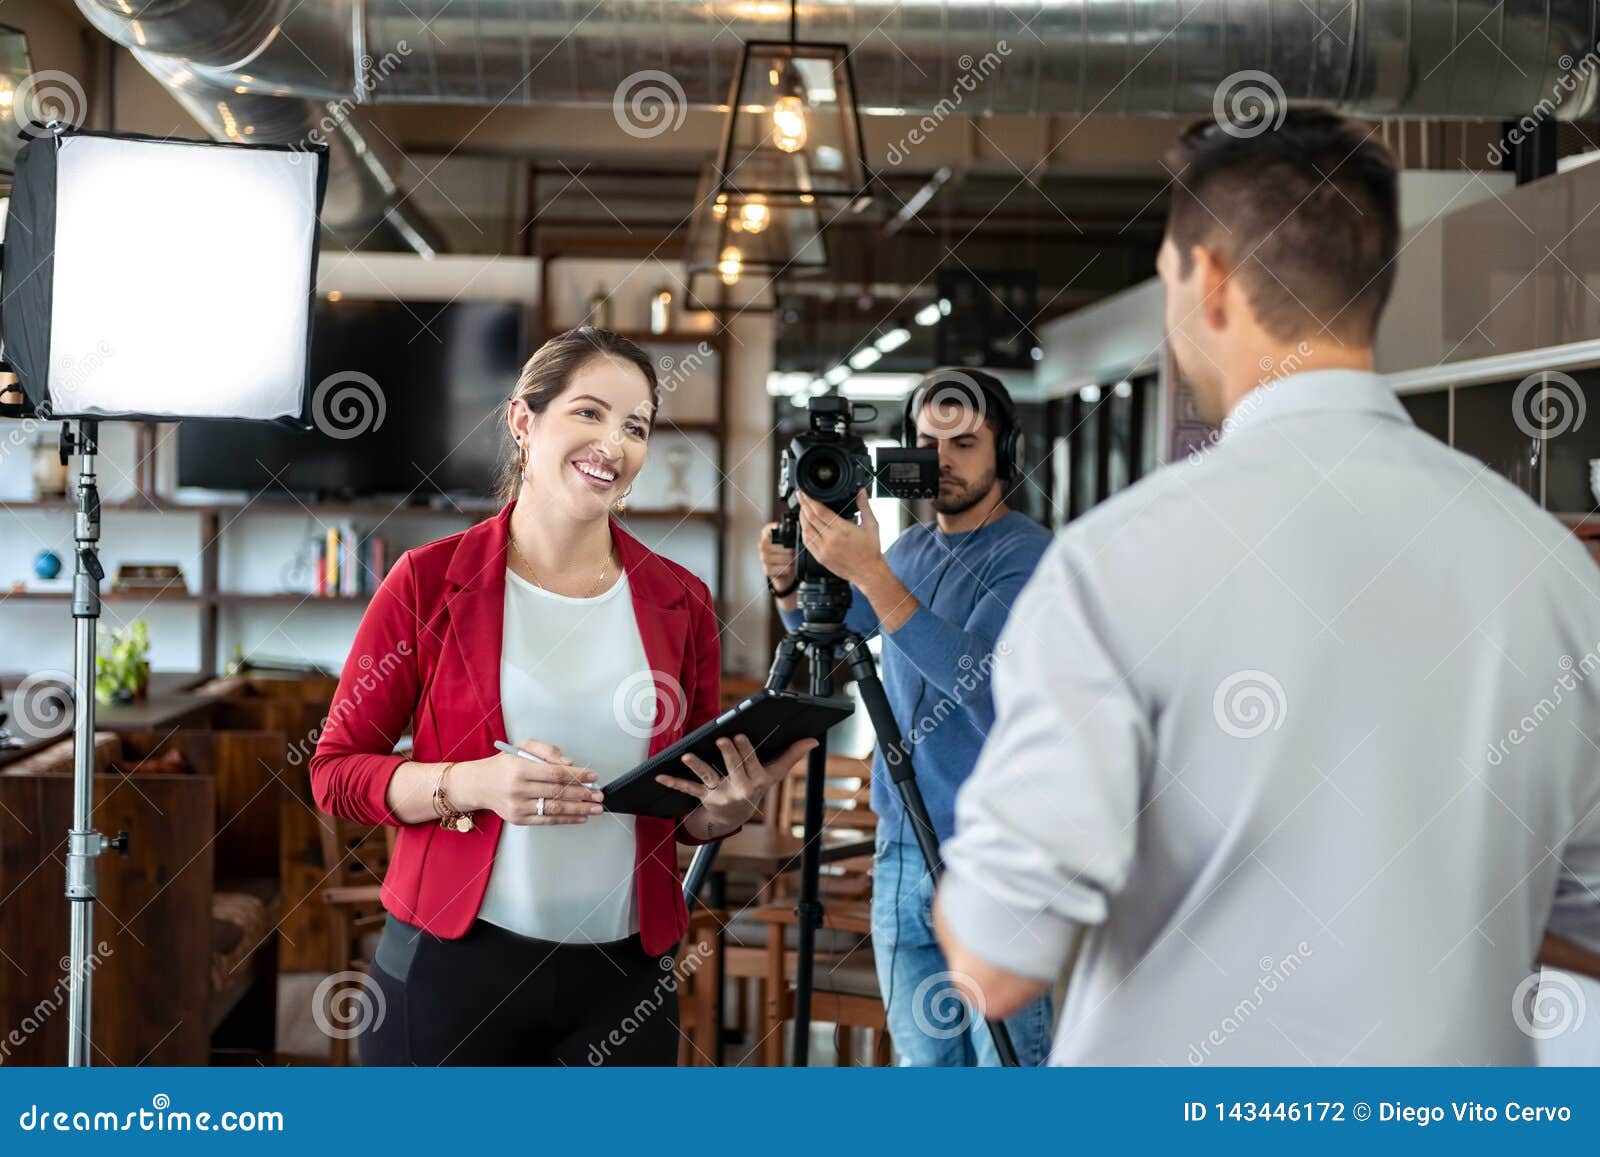 journalist interviewing business man in conference room for broadcast